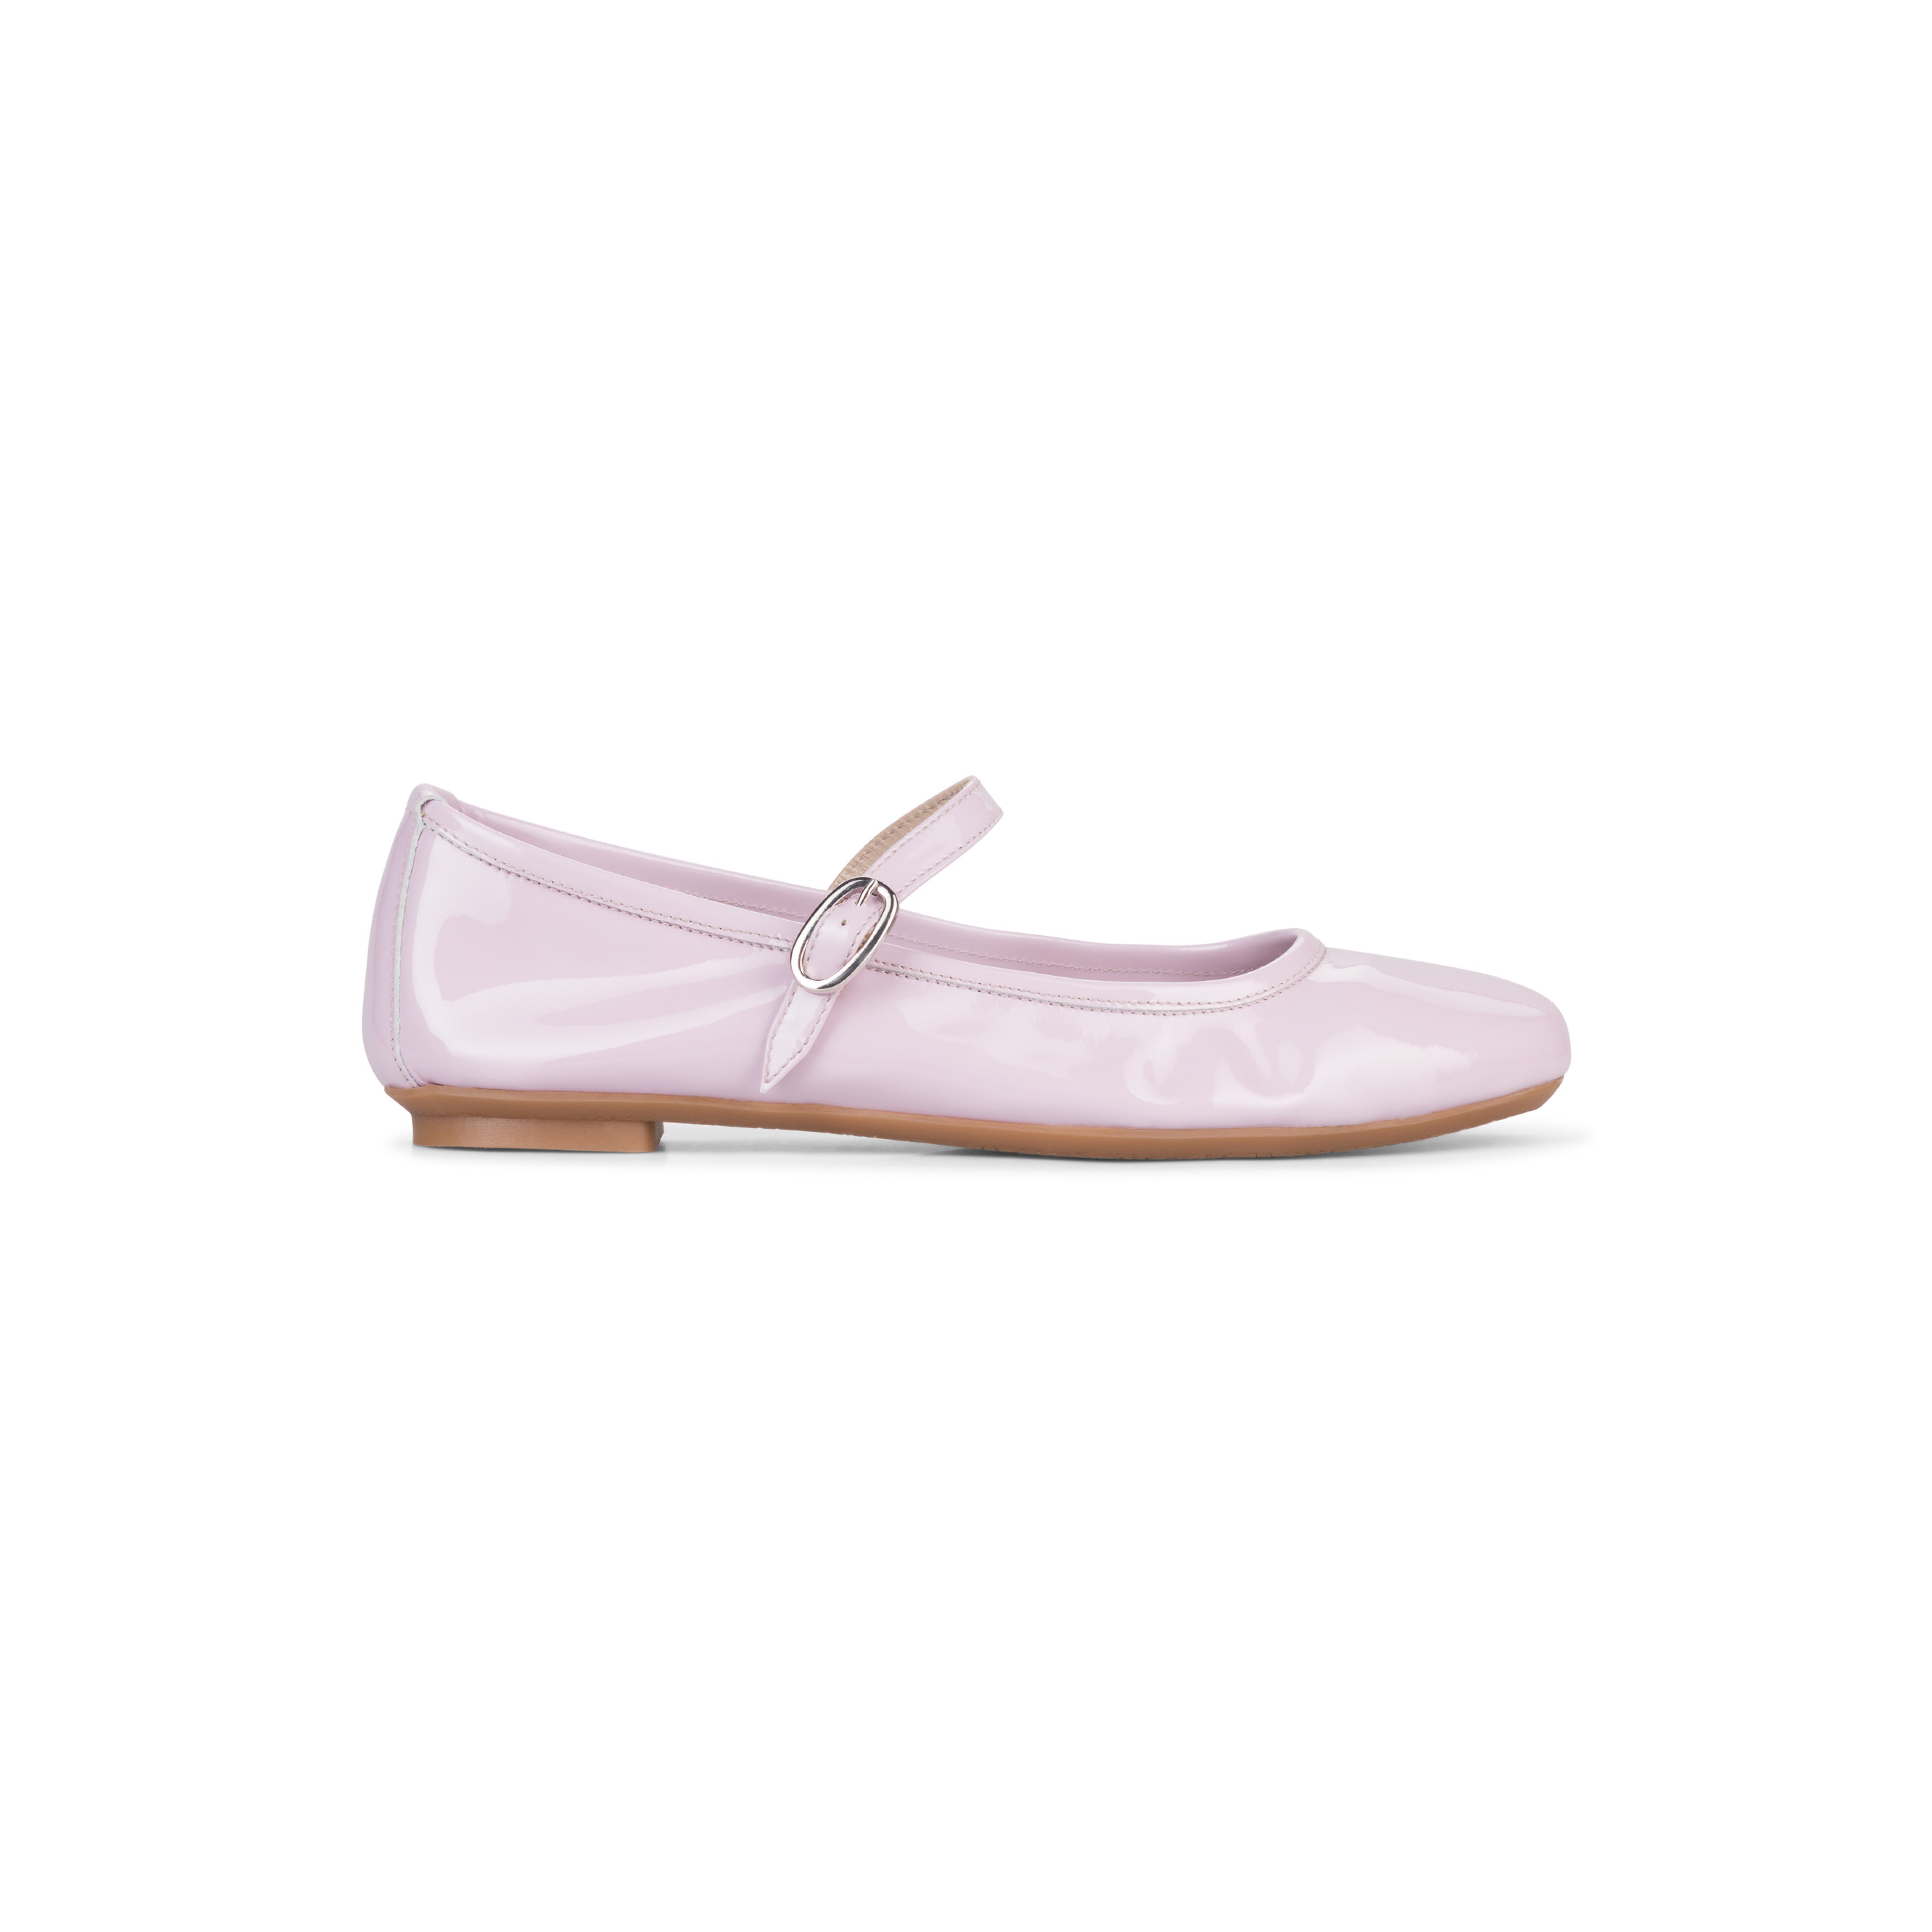 Hai — Hai x Reqins Honoree Shoes in Lilac Patent Leather